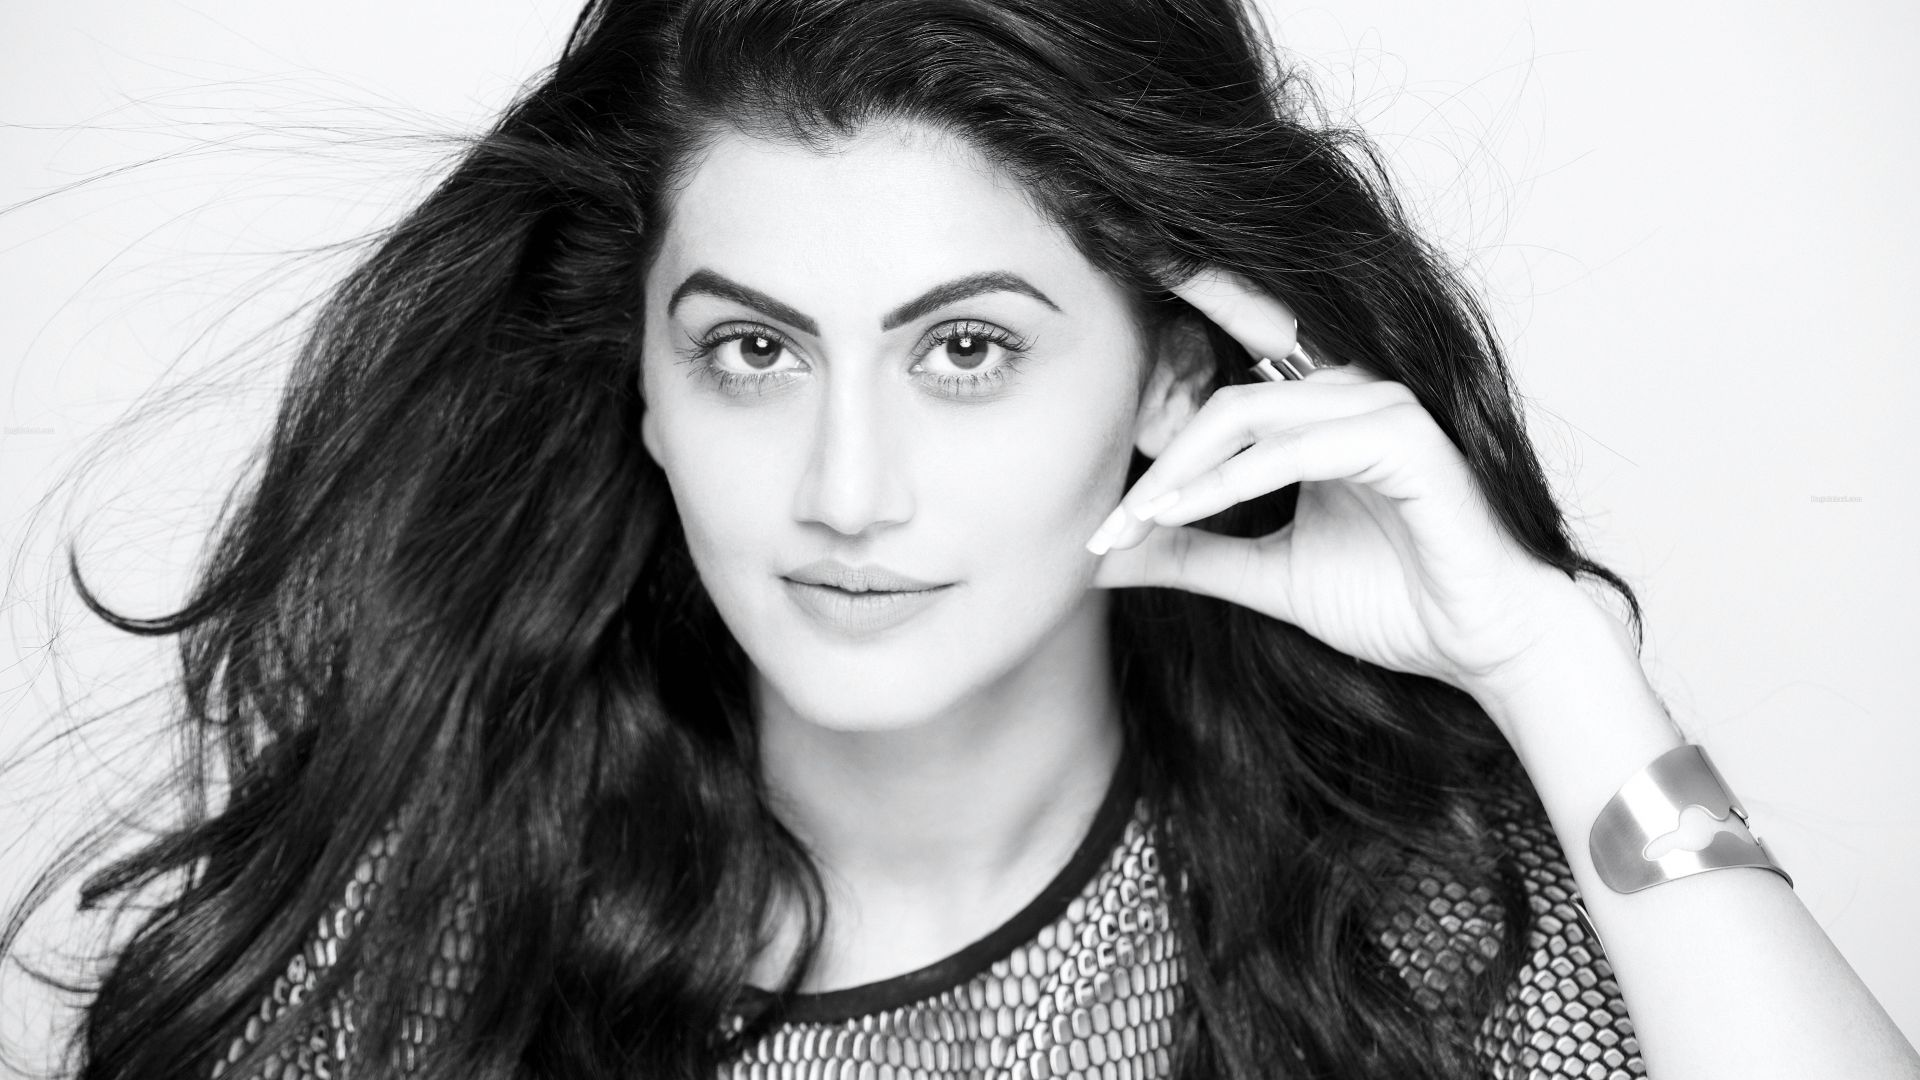 Wallpaper Taapsee pannu, actress, bollywood model, monochrome, 5k